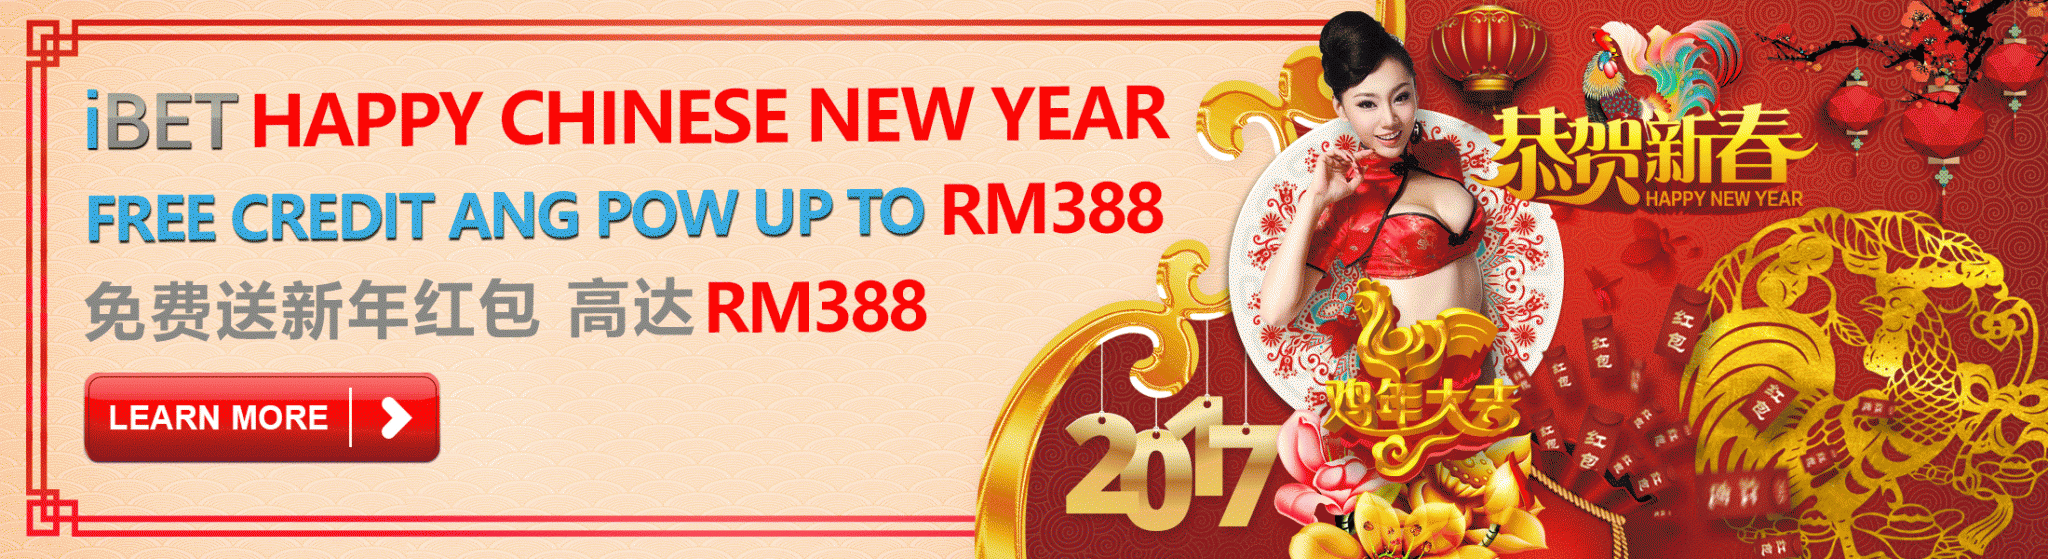 918Kiss(Scr888) Casino Celebrate Happy CNY of Golden Rooster